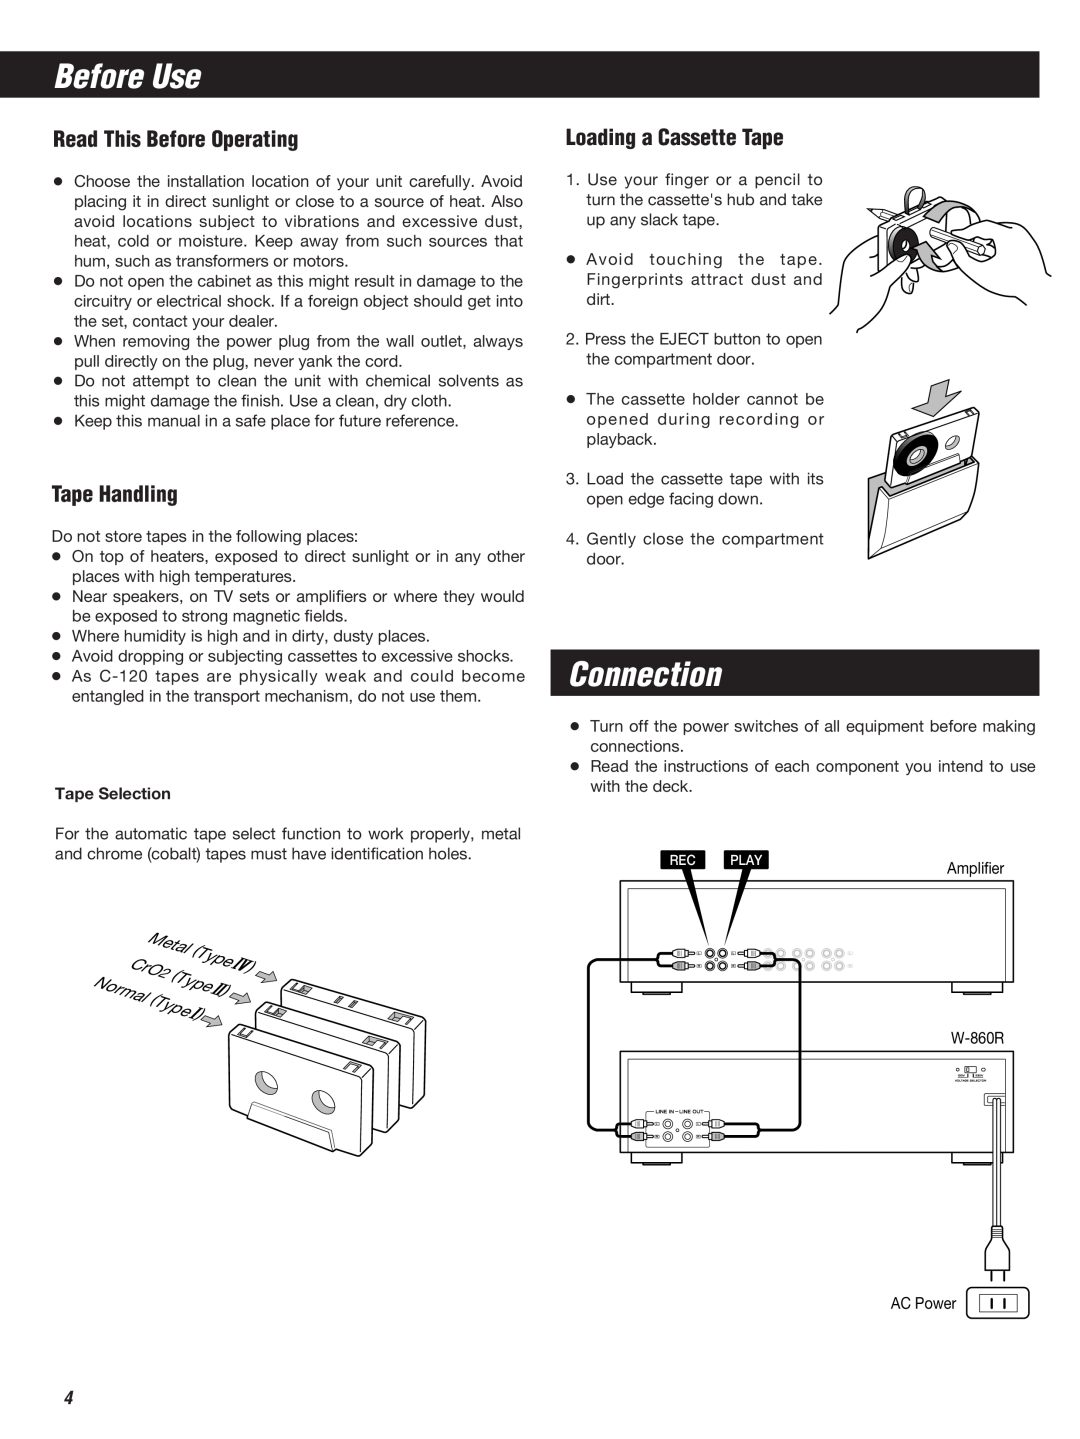 Teac W-860R owner manual Before Use, Connection, Read This Before Operating, Tape Handling, Loading a Cassette Tape 